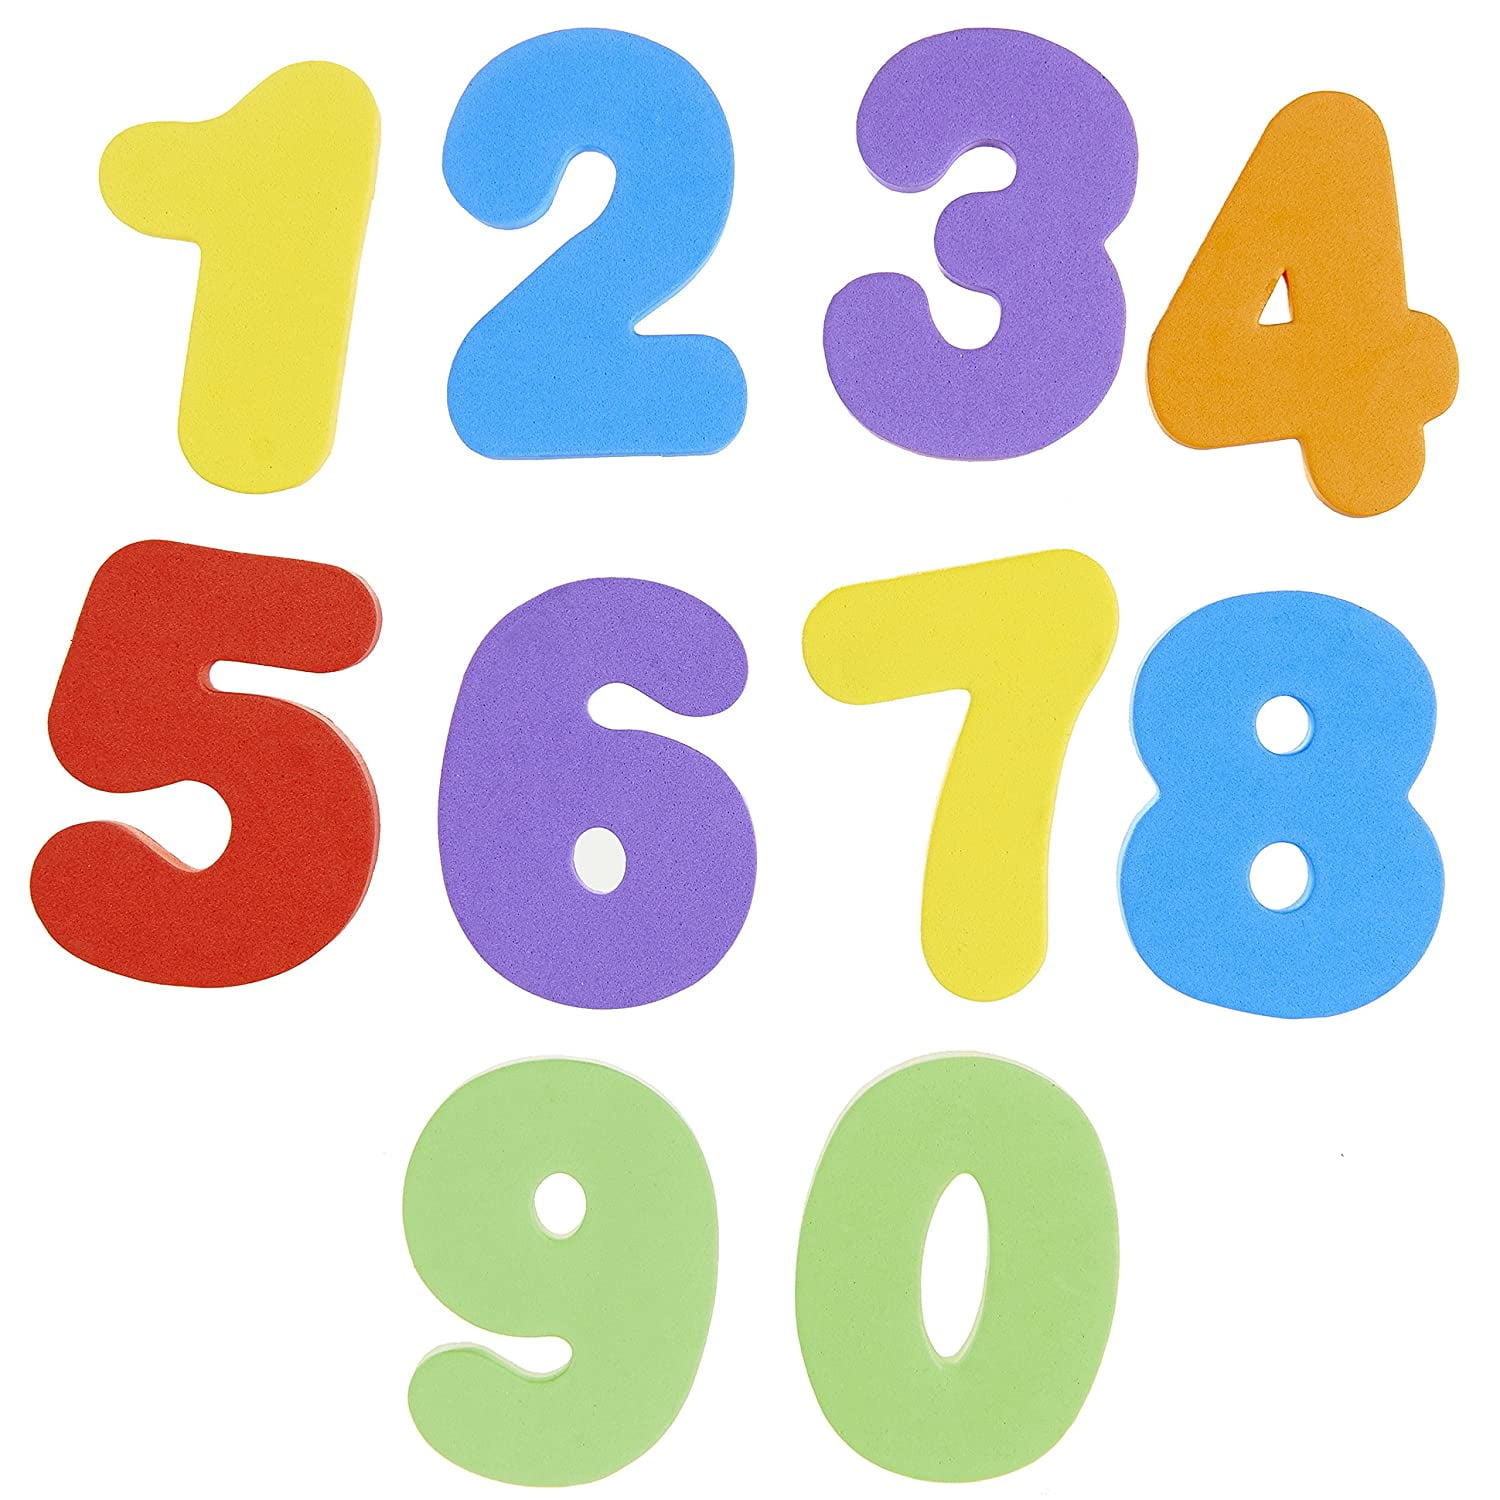 Foam numbers stock photo. Image of toys, objects, colors - 25340058